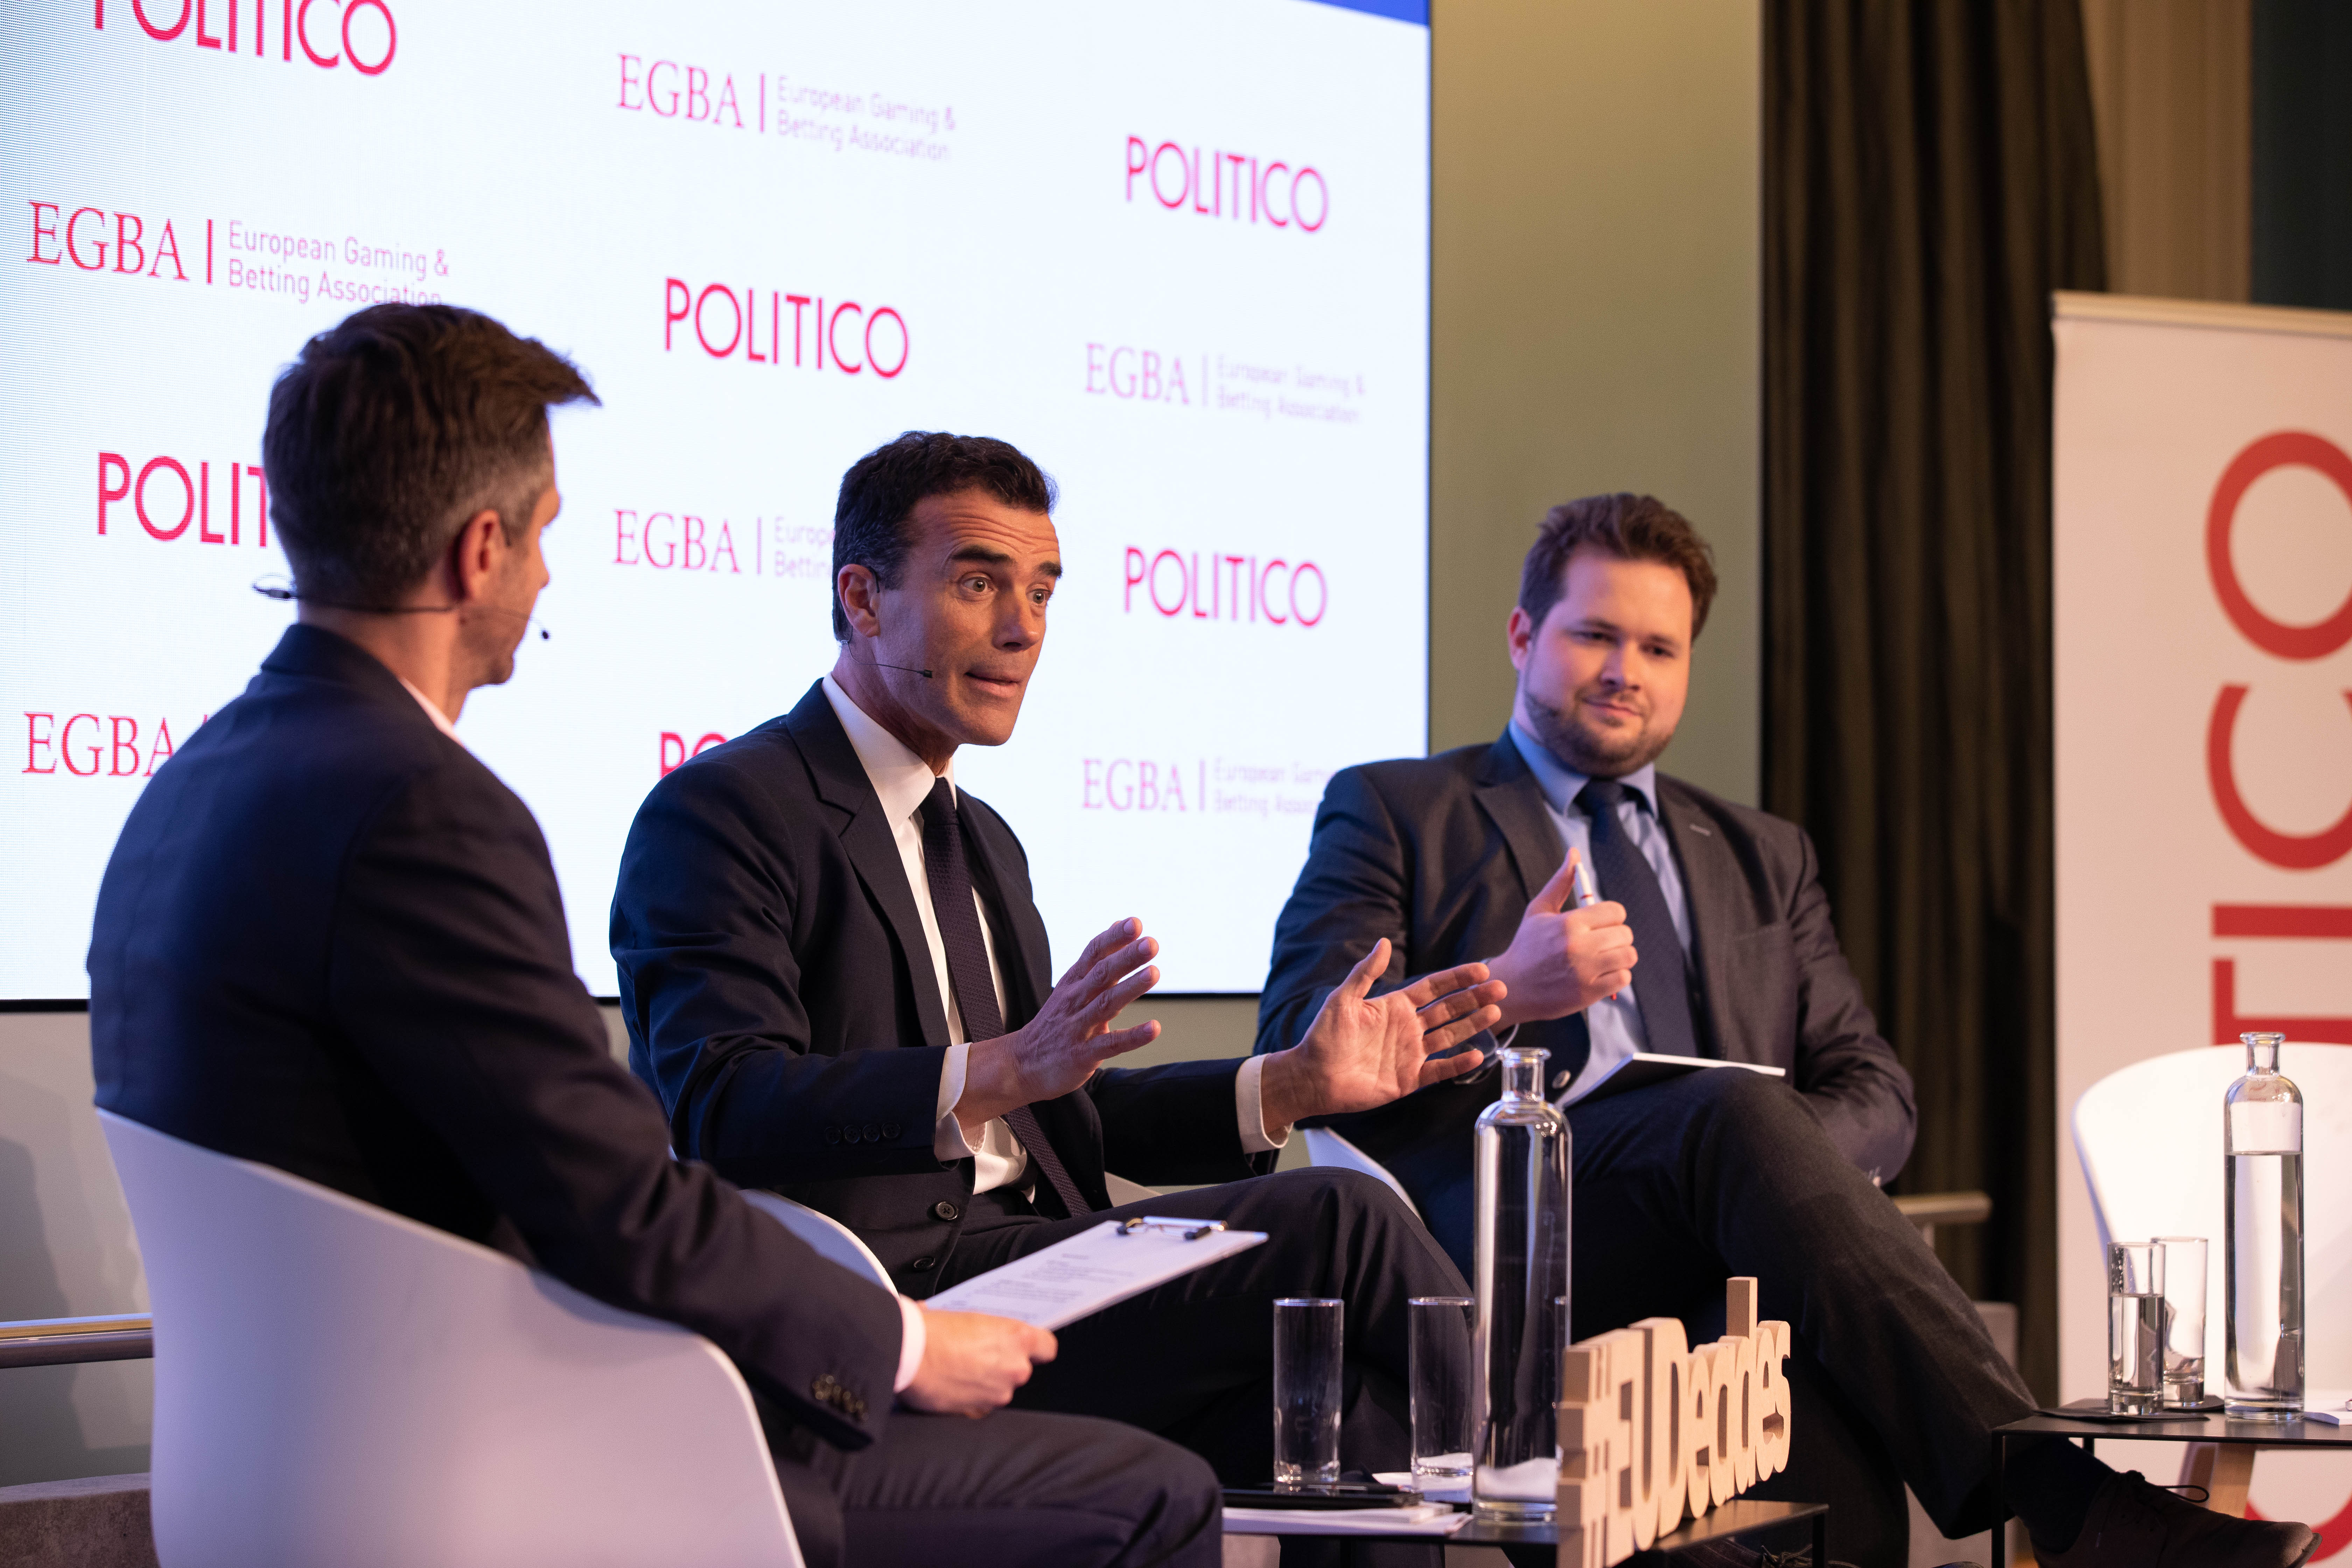 Event video: “2019 European Elections: The Case For and Against the EU”